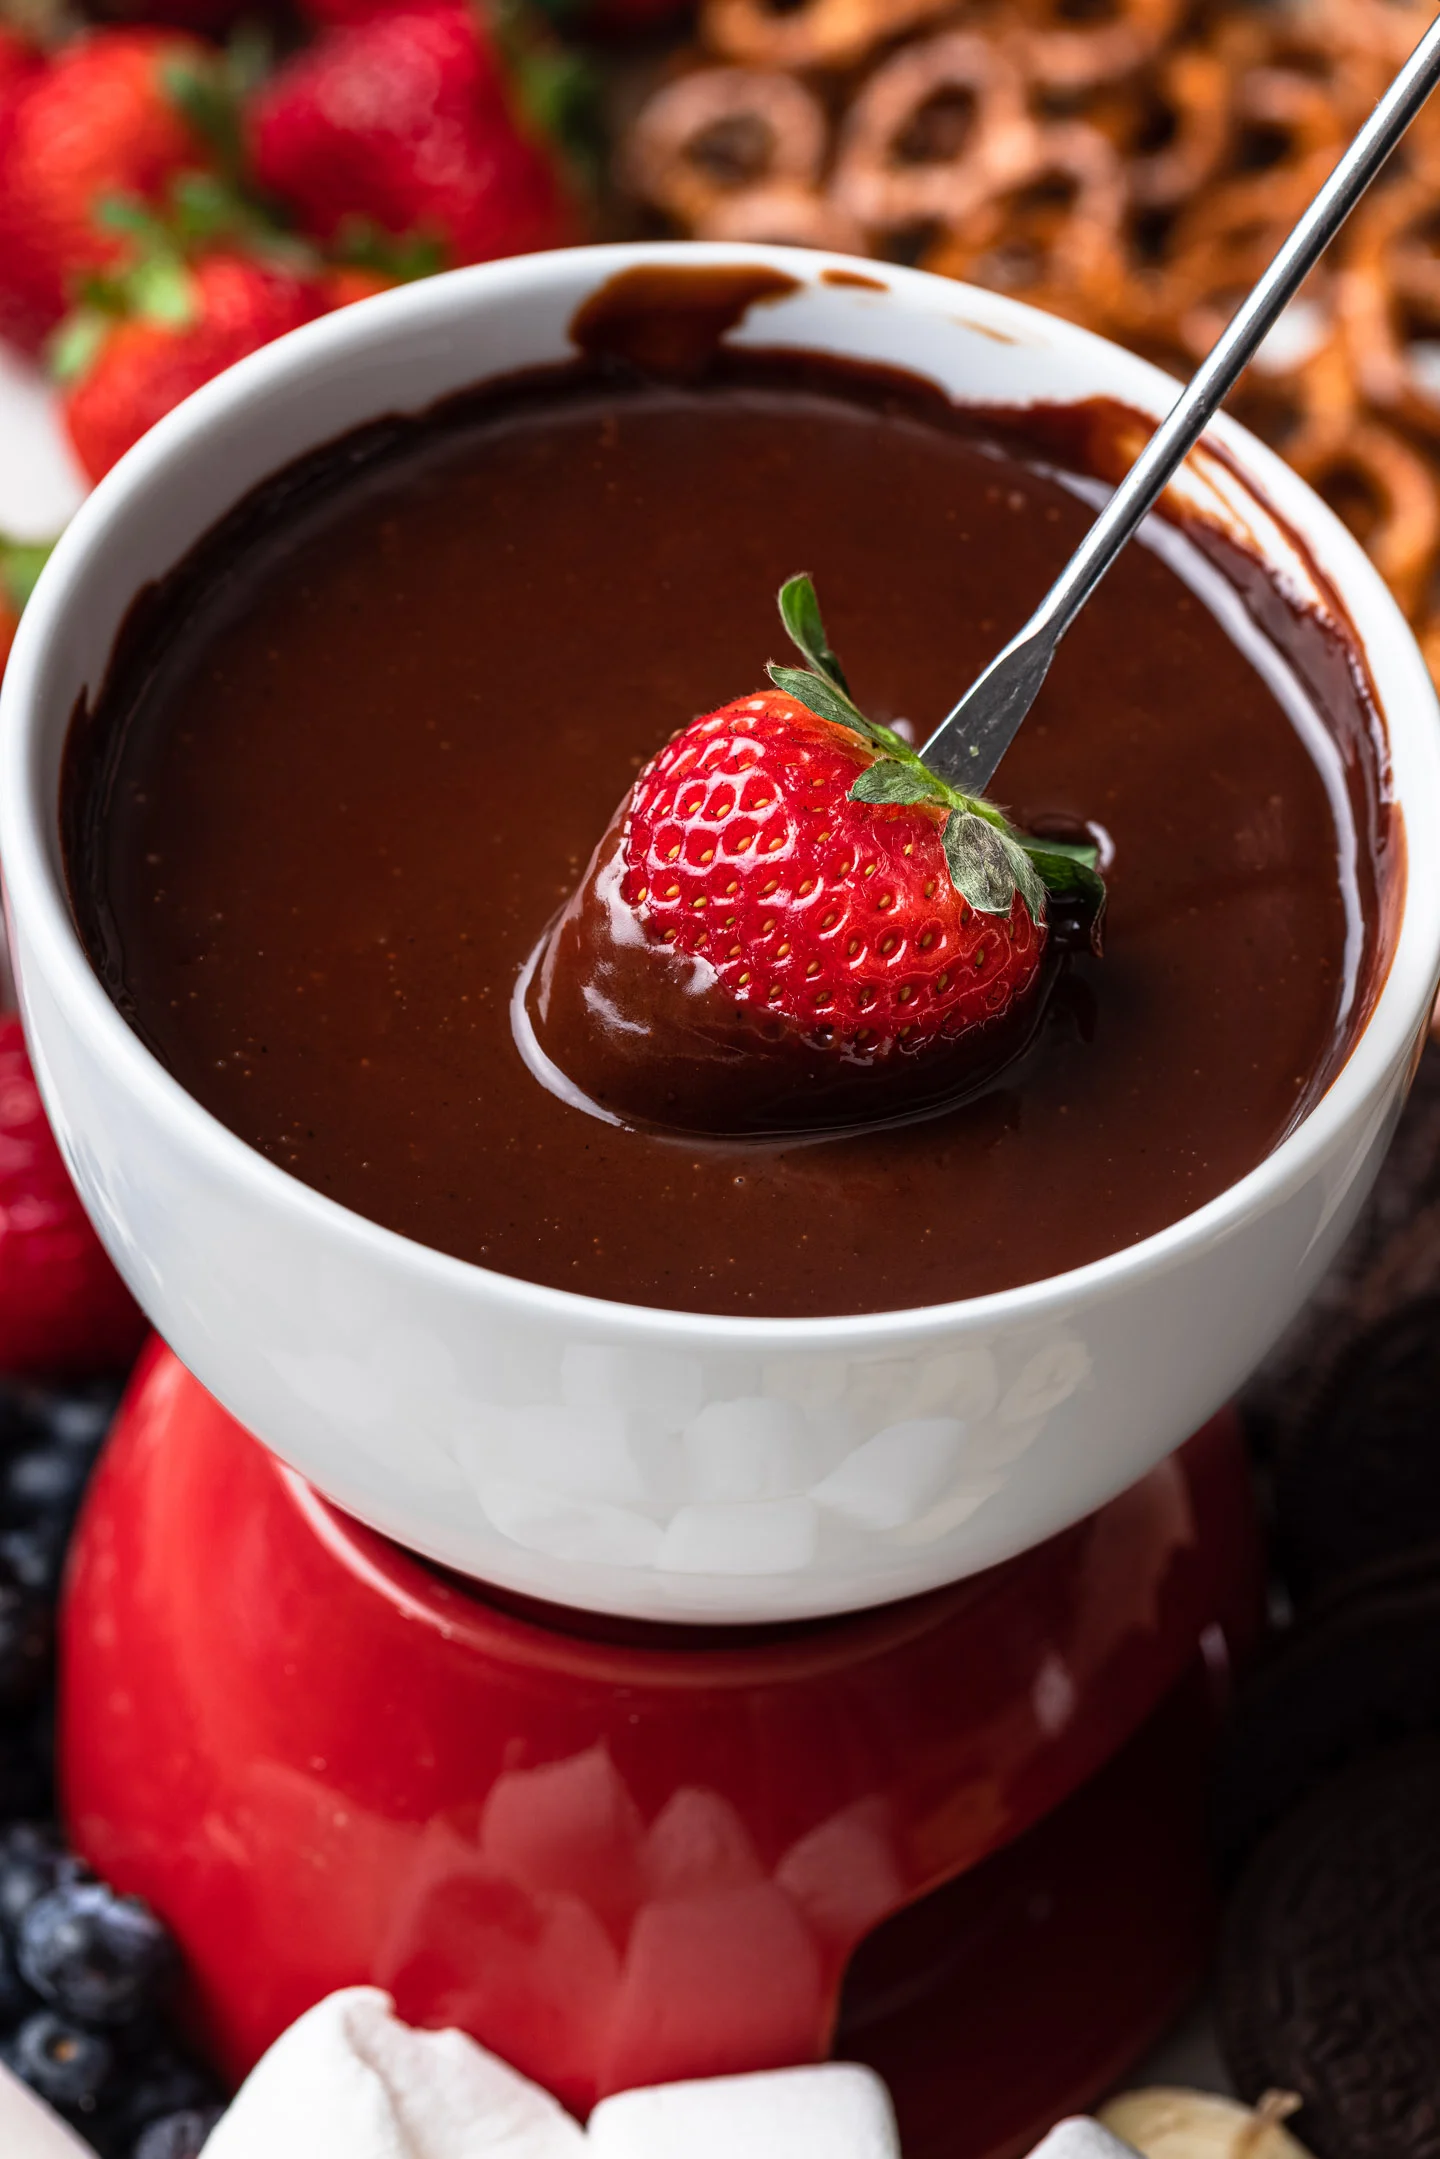 Image of fondue pot filled with chocolate and a strawberry being dipped